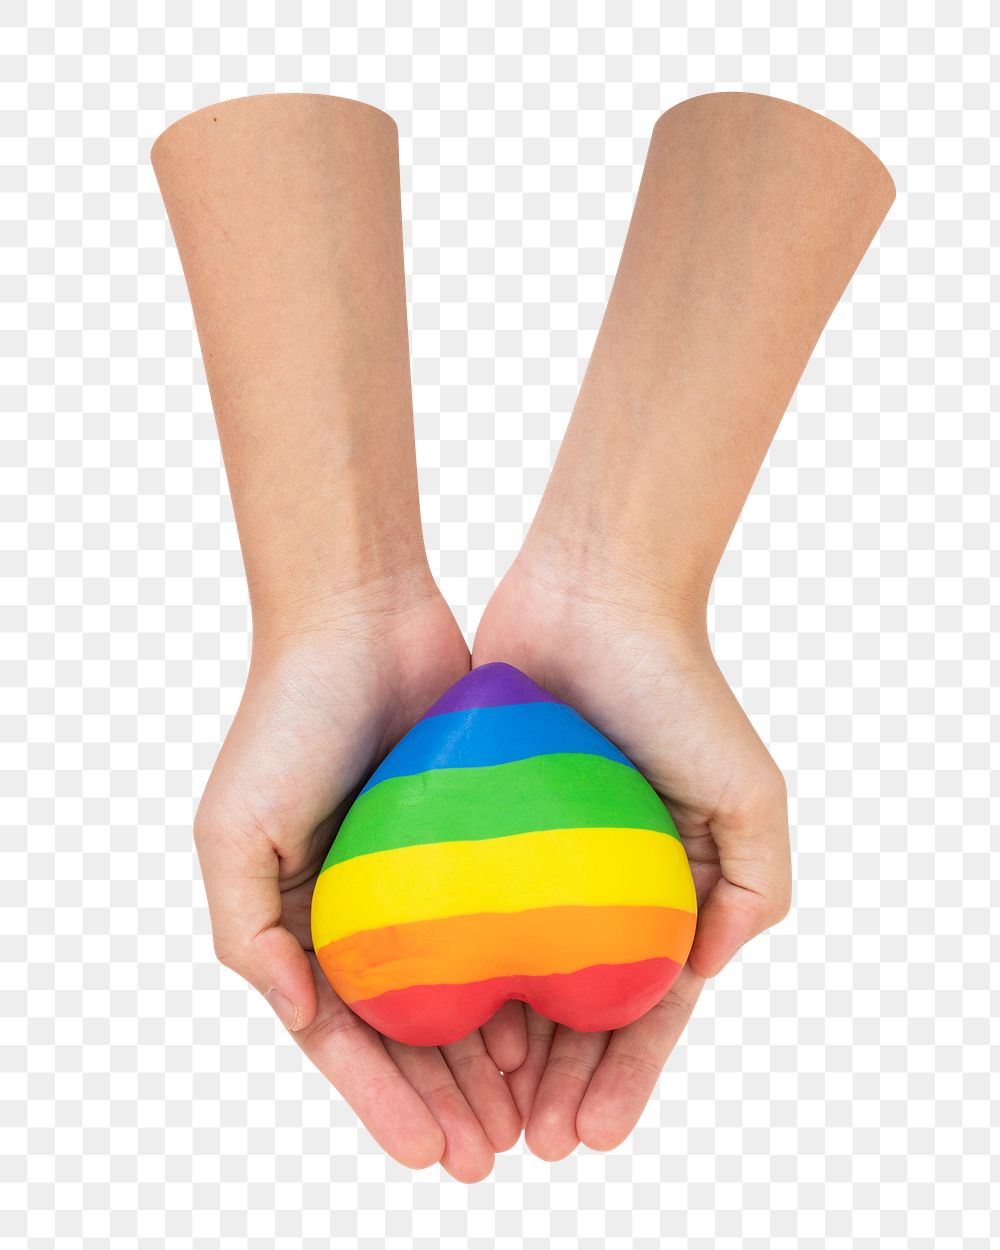 Rainbow heart png sticker in hands, transparent background